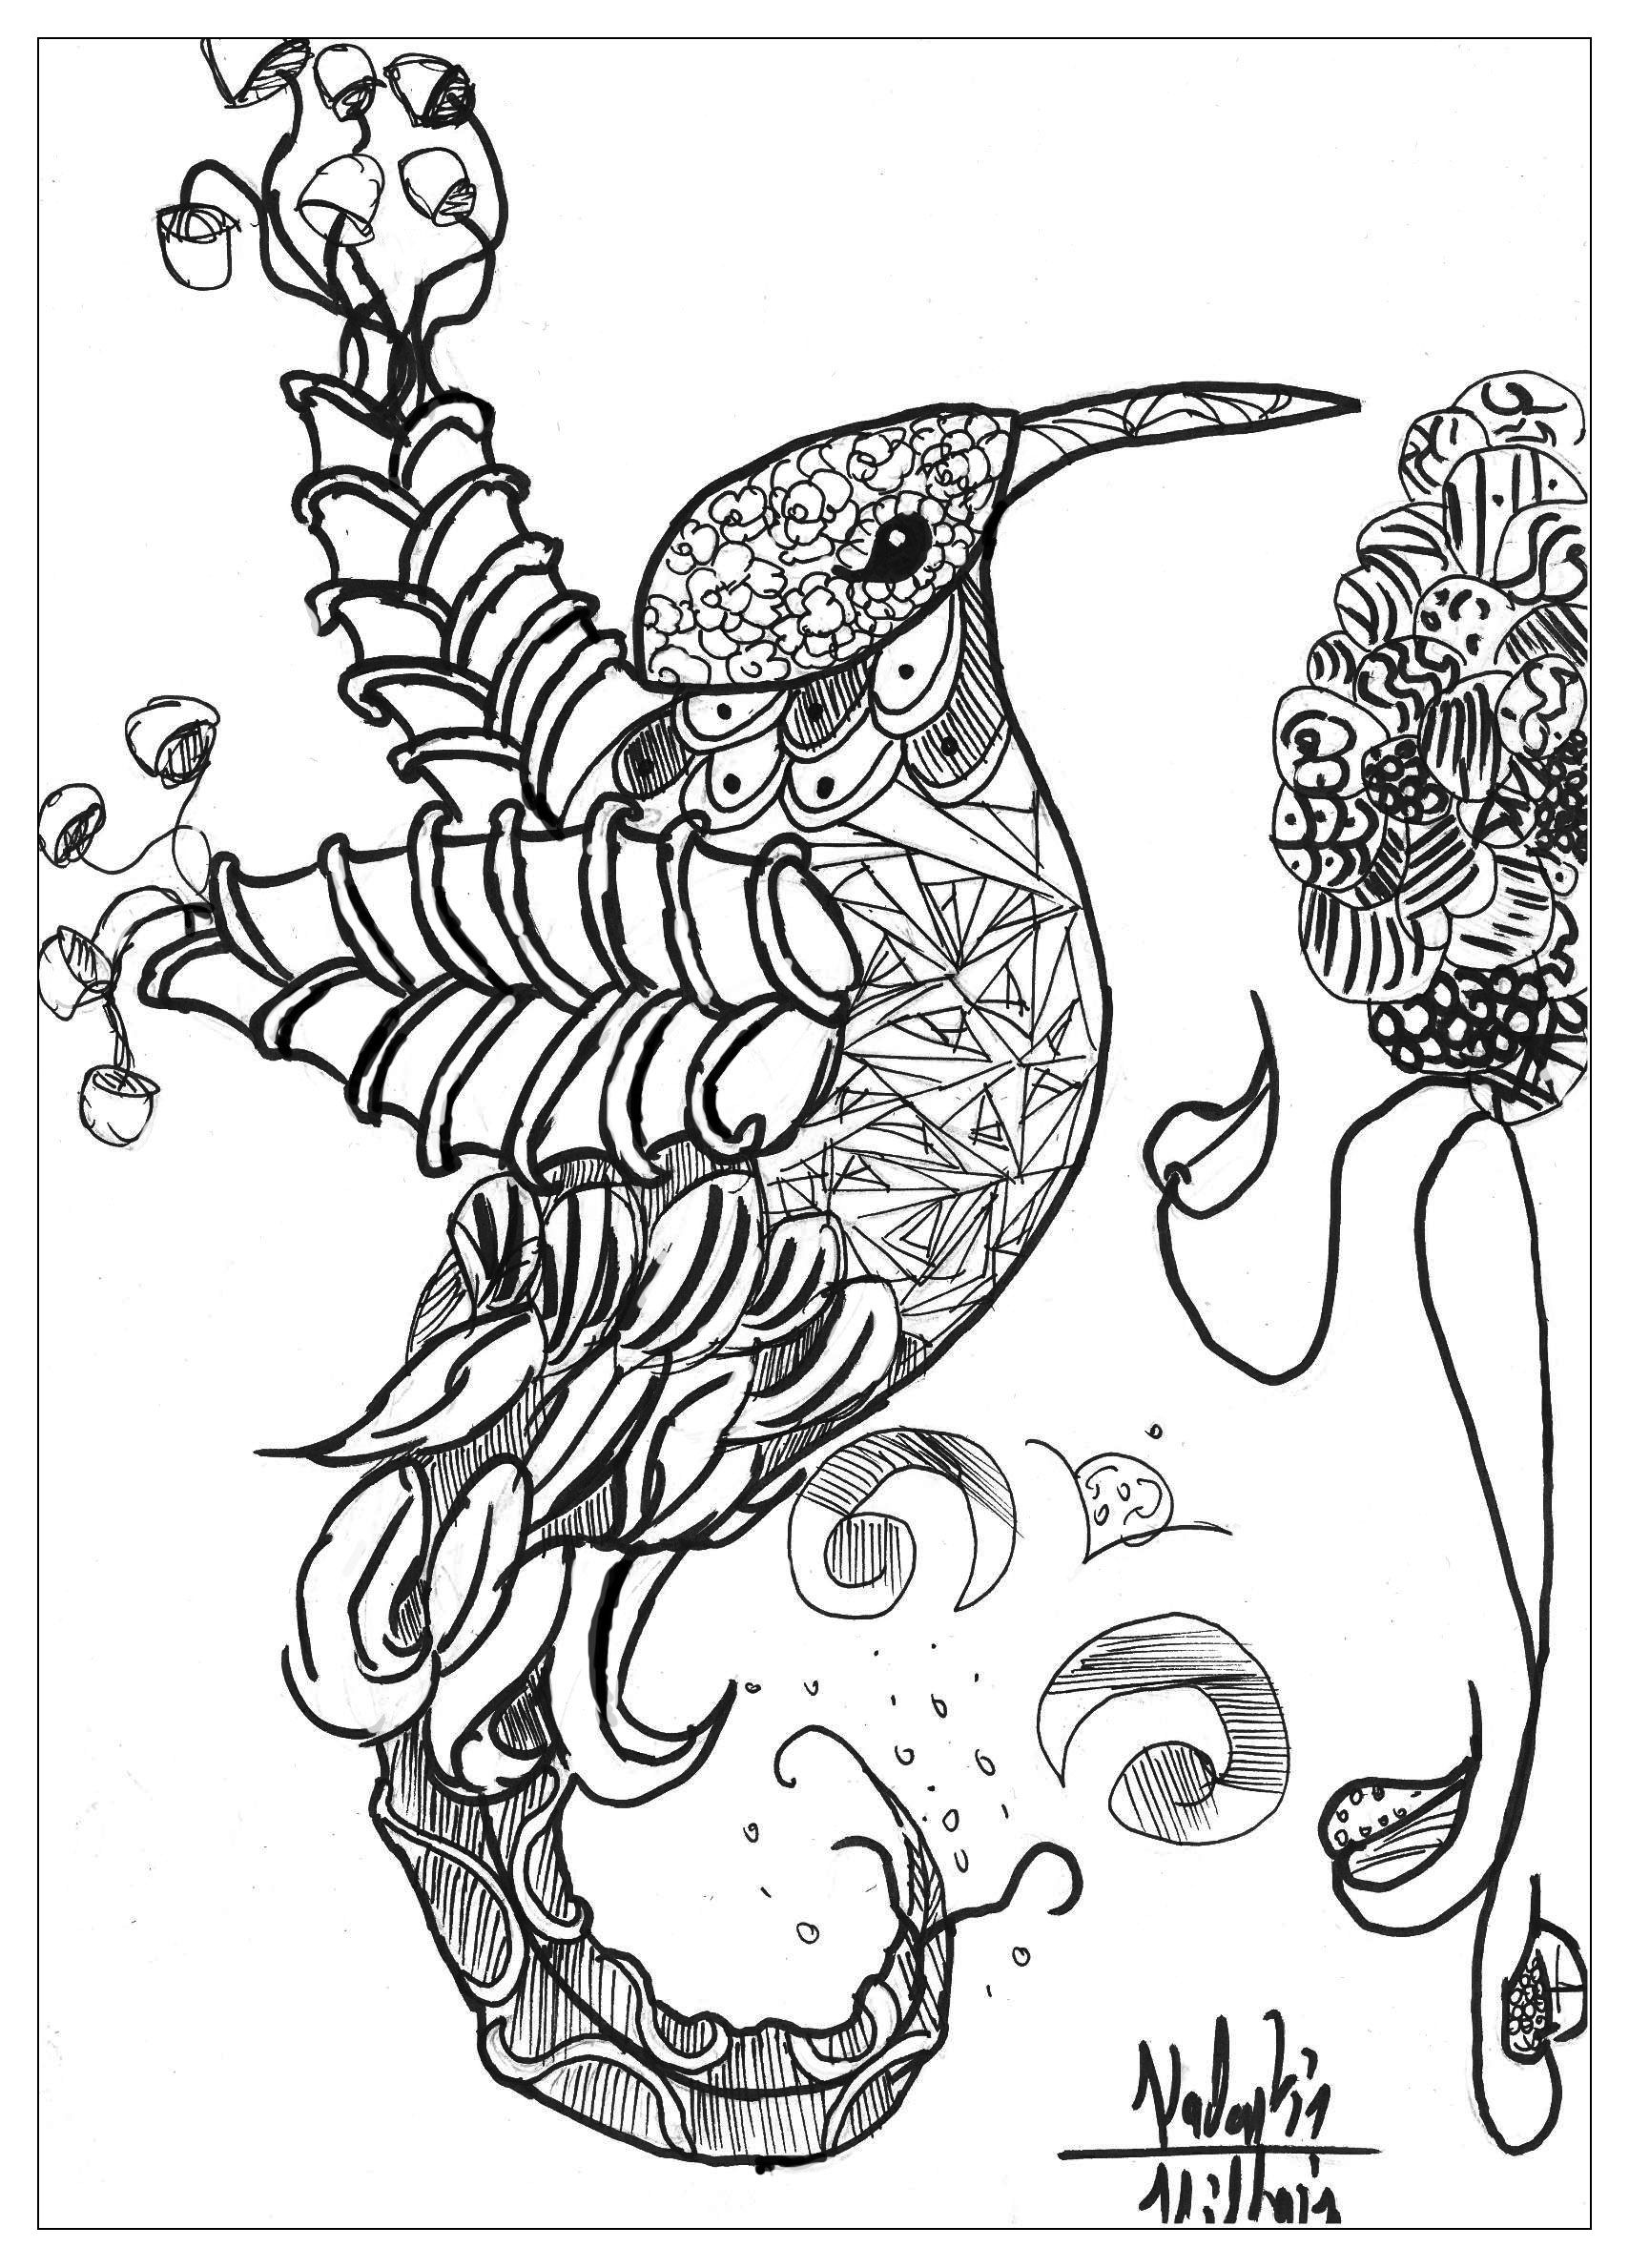 Free Animal Design Coloring Pages, Download Free Animal Design Coloring